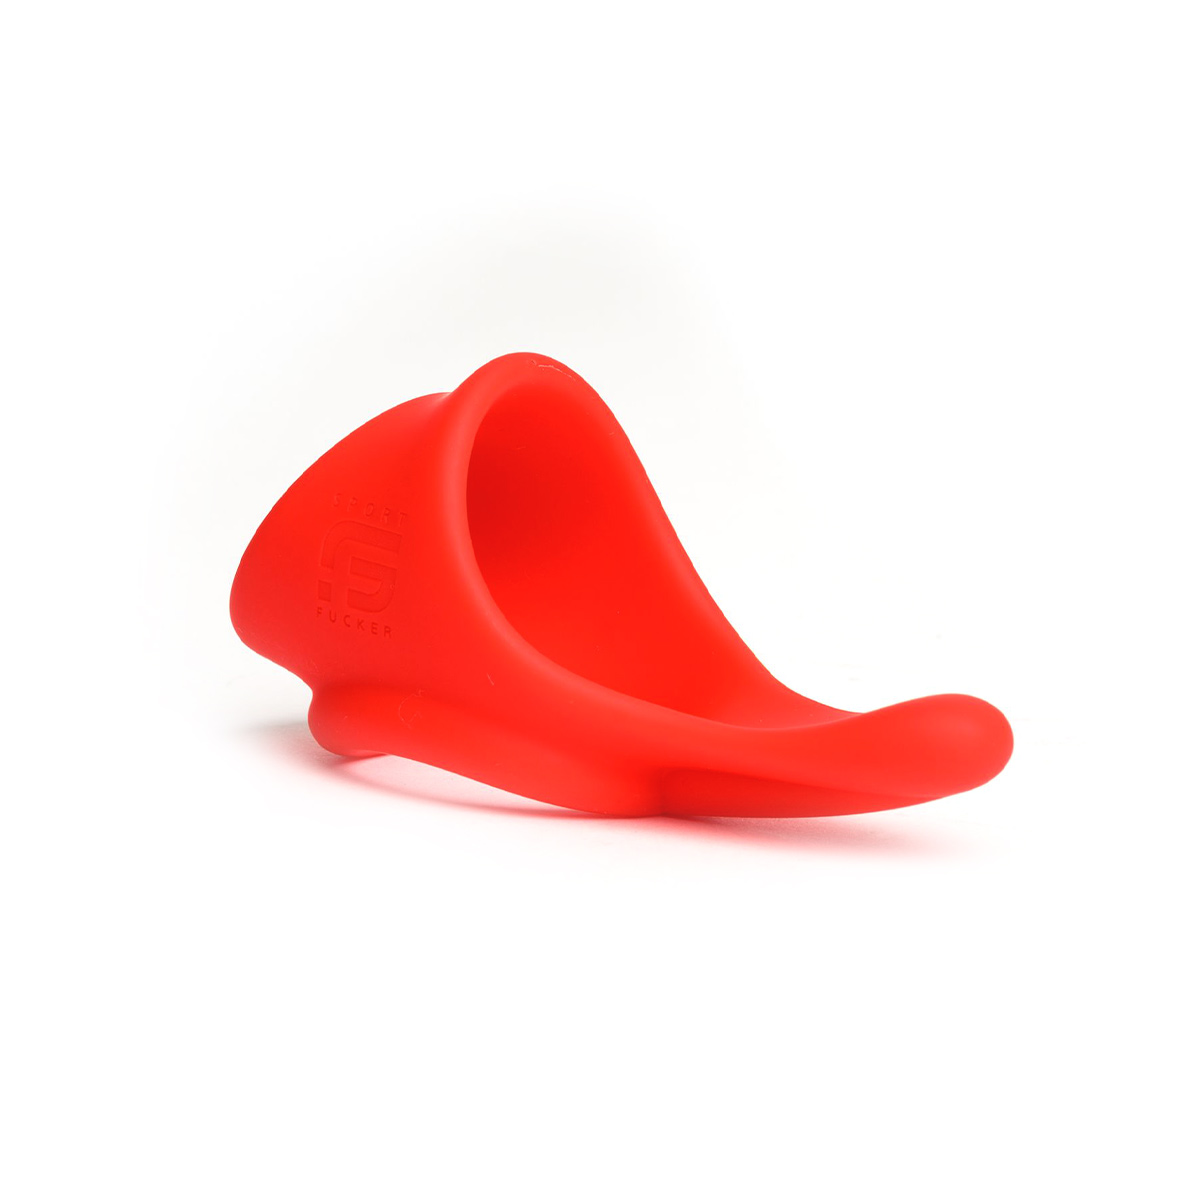 Sport-Fucker-Tailslide-Silicone-Cocksling-Red-OPR-2870153-1